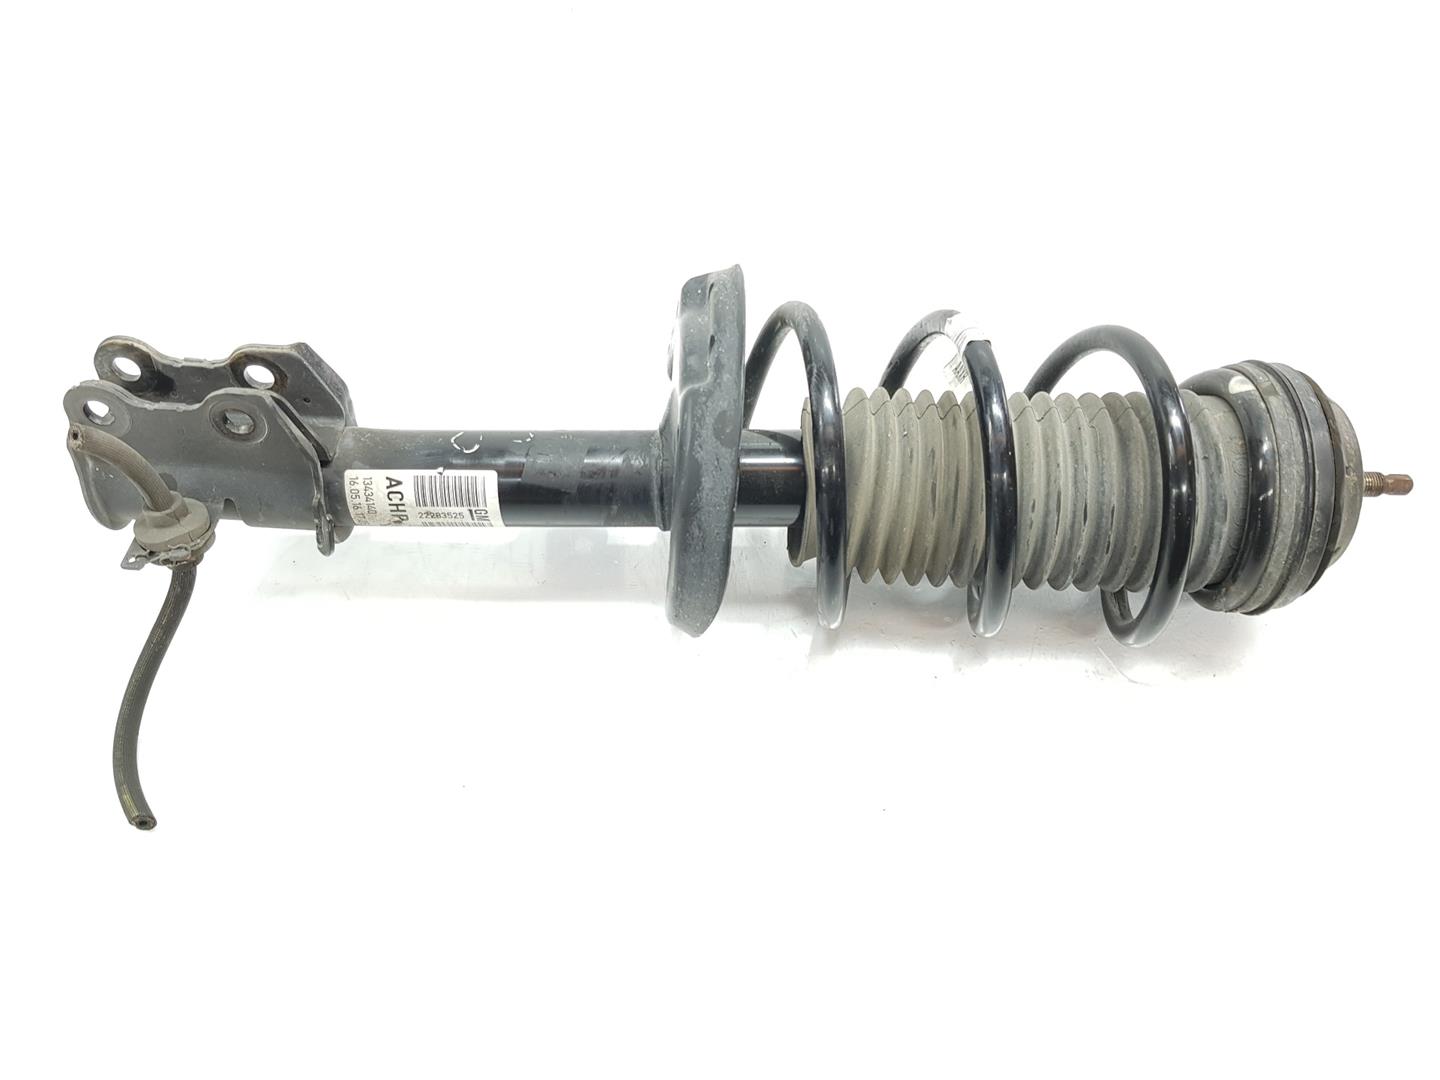 OPEL Corsa D (2006-2020) Front Right Shock Absorber 22283525, 13434140 24249190